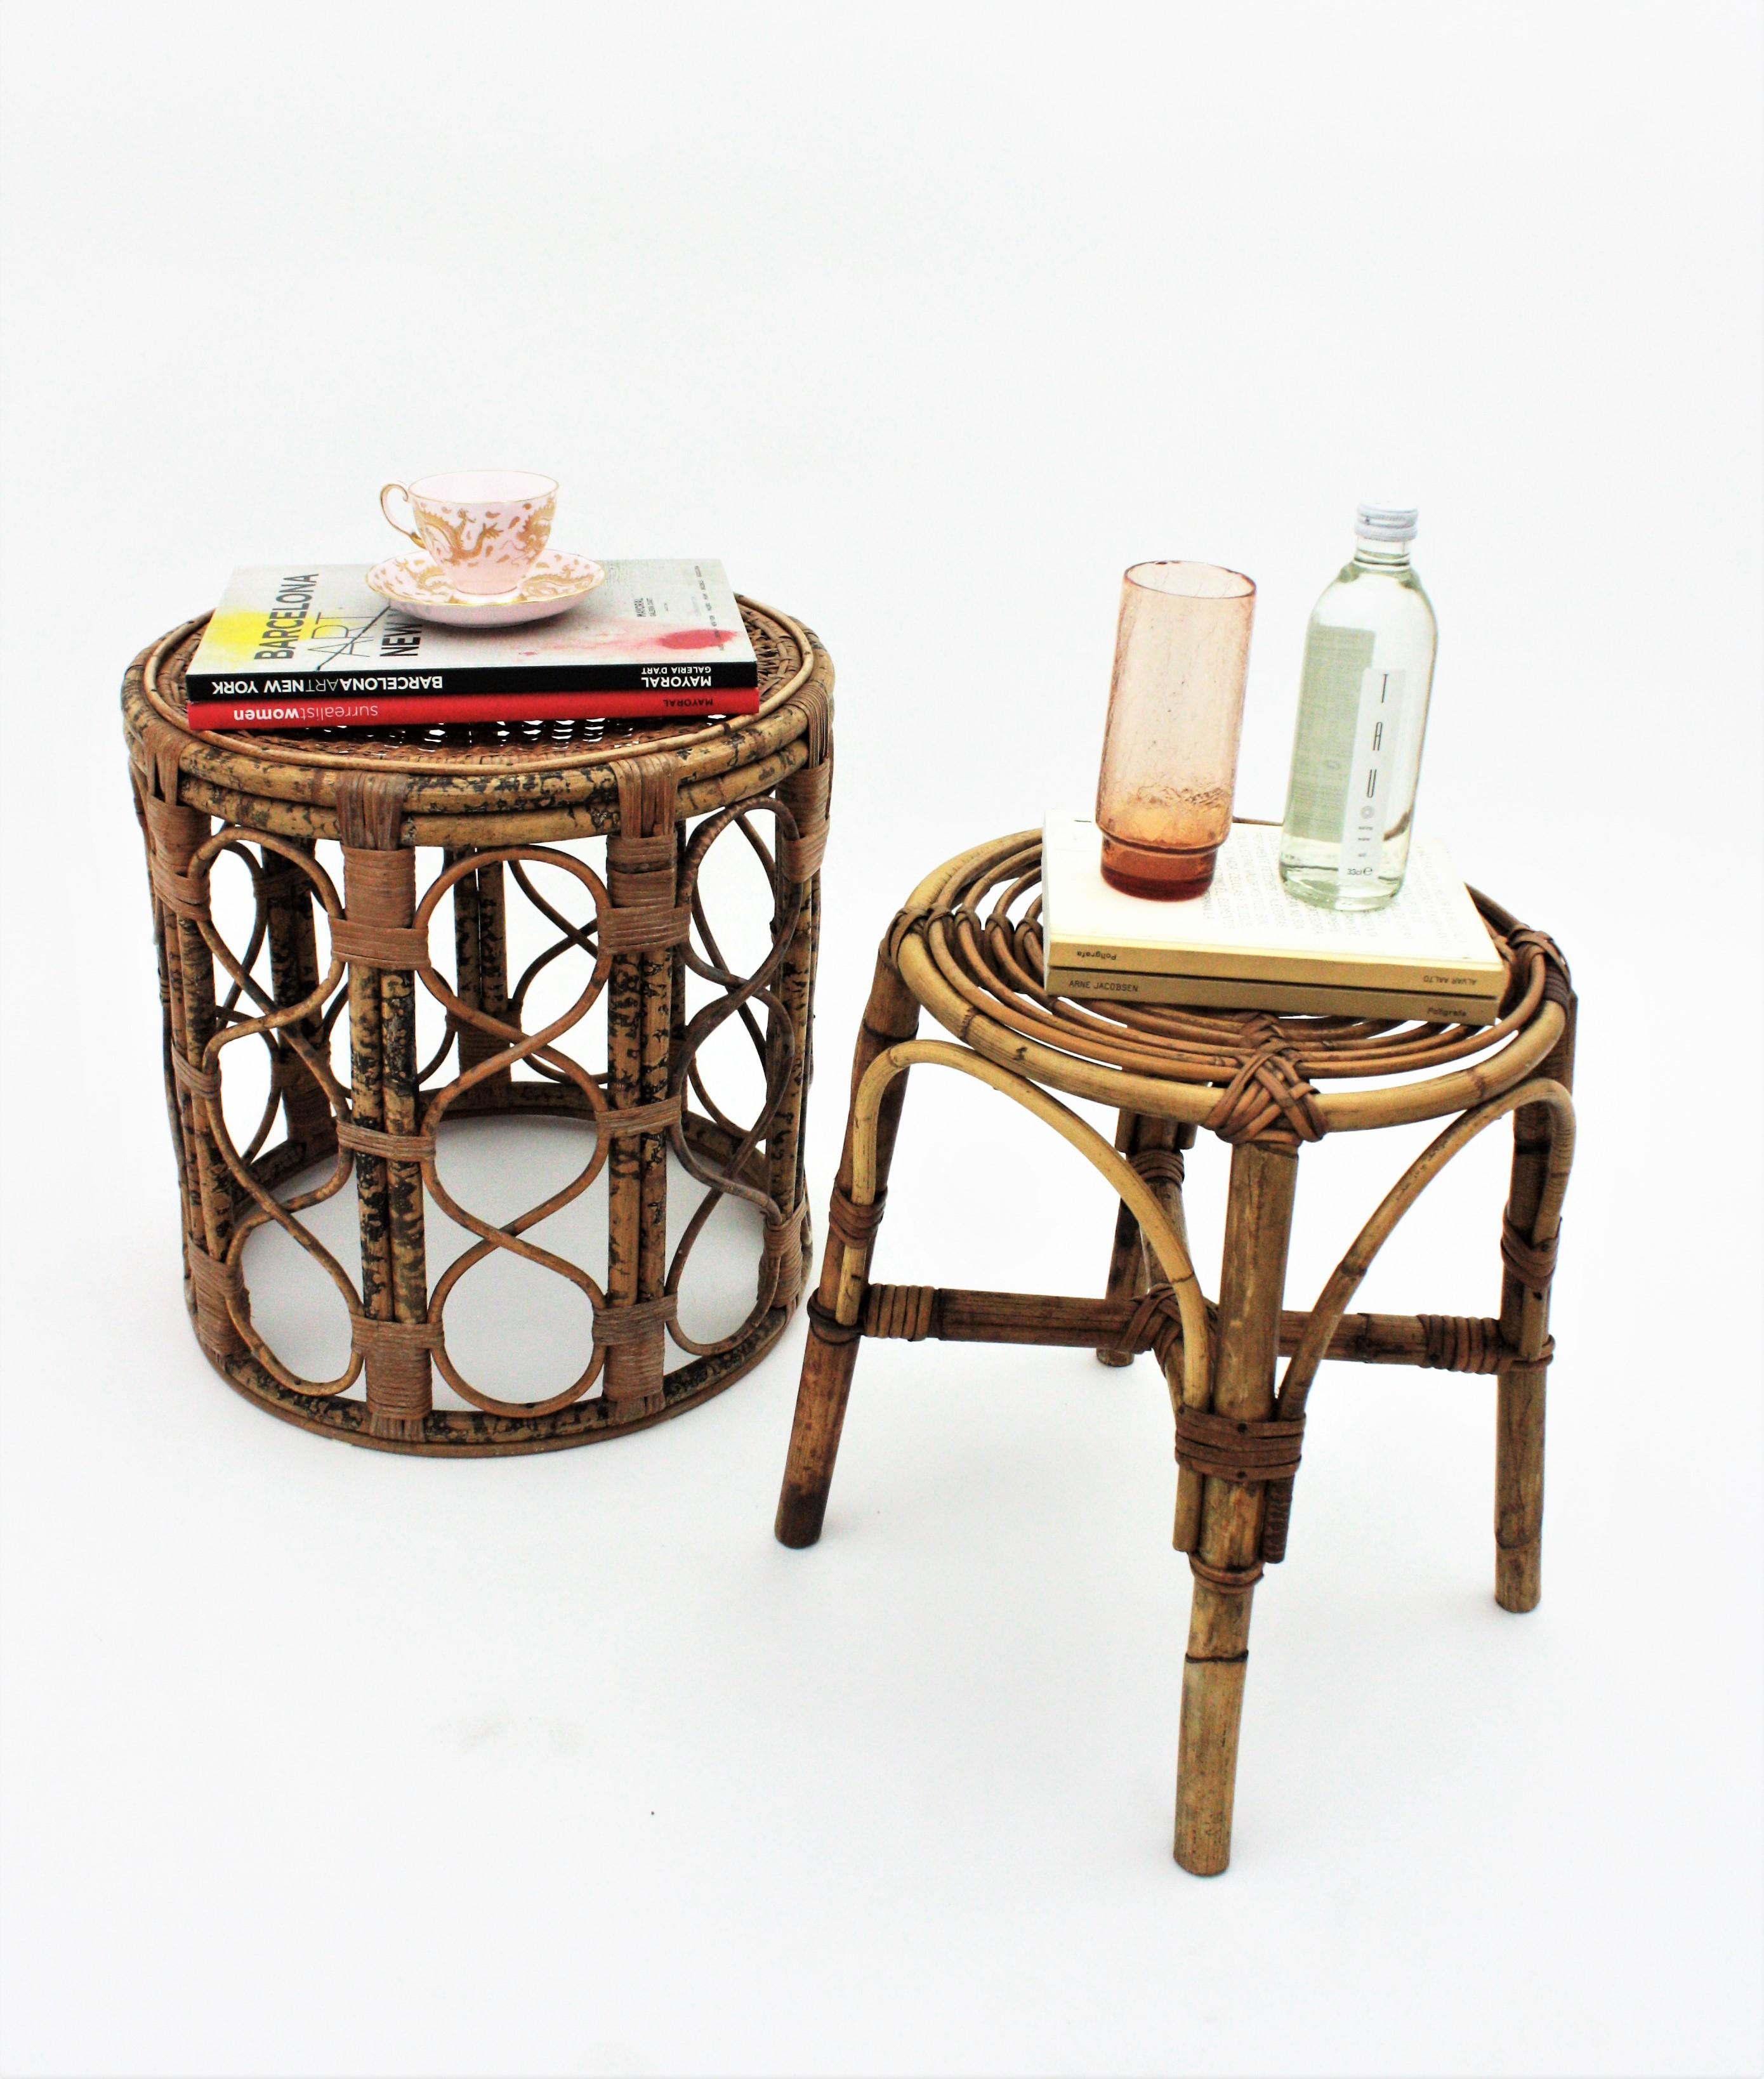 French Side Table or Stool in Tiger Bamboo Rattan with Woven Wicker Top, 1940s For Sale 10